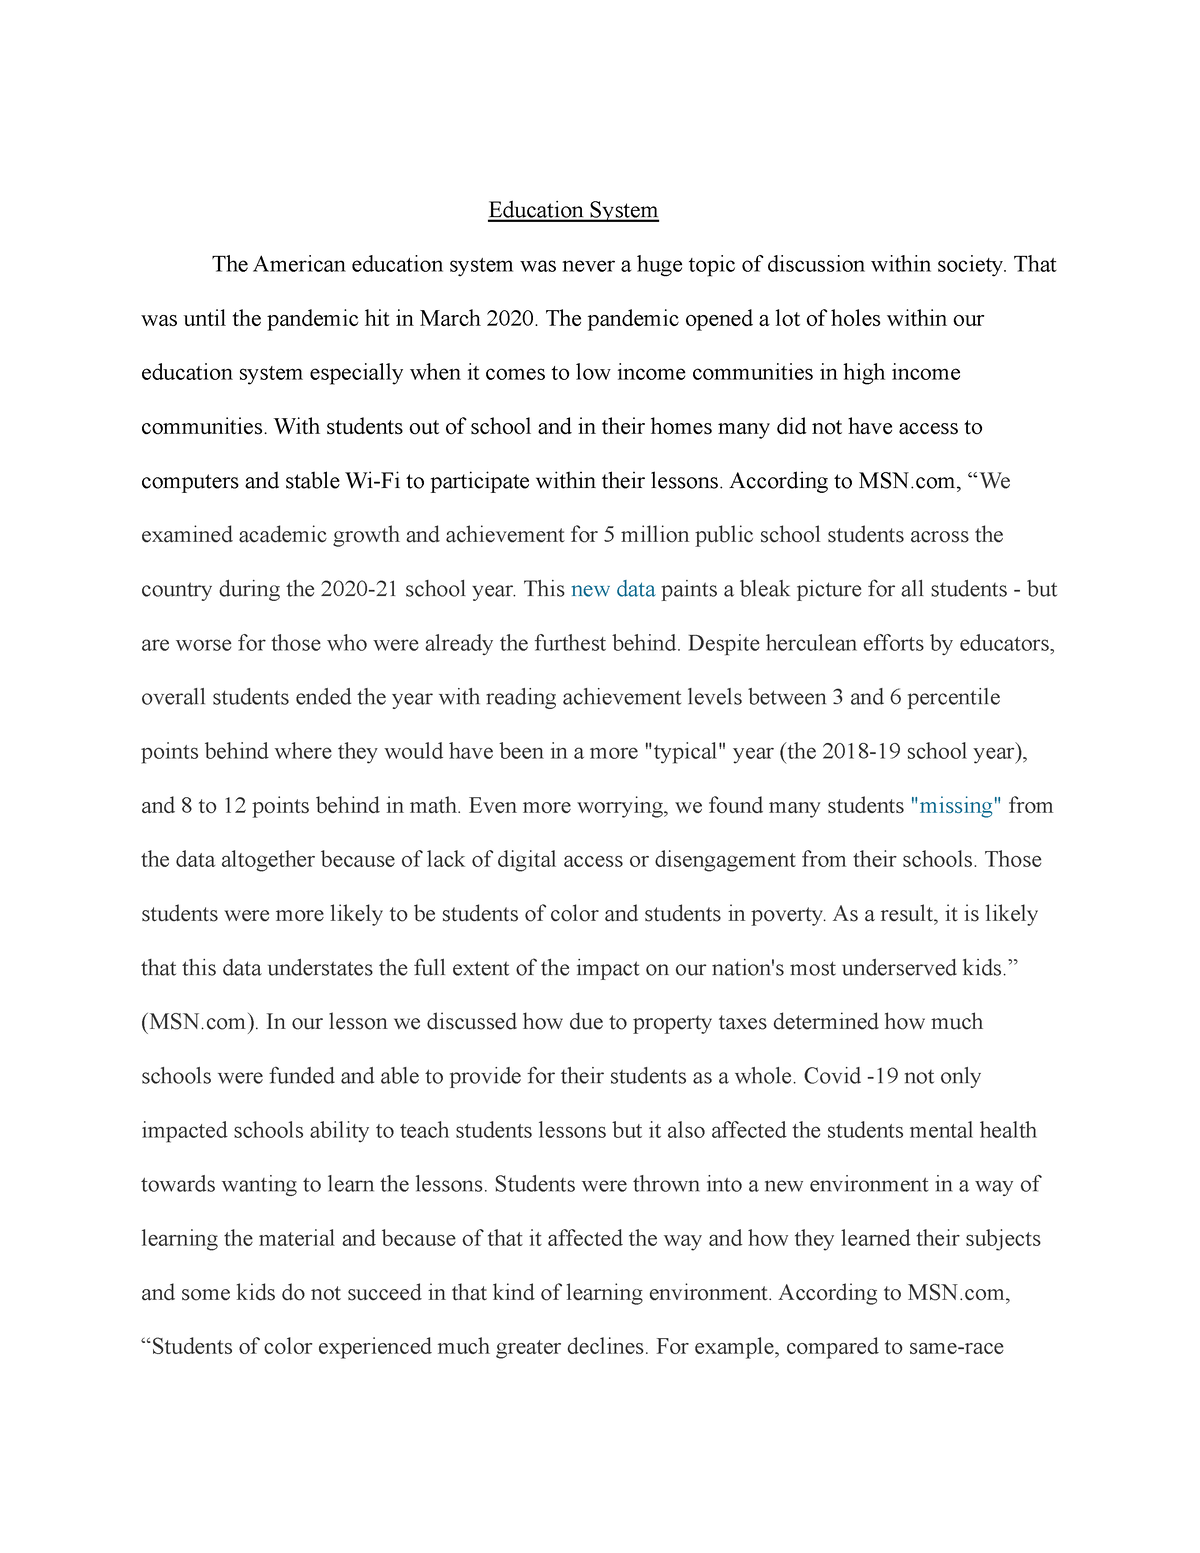 essay about american education system